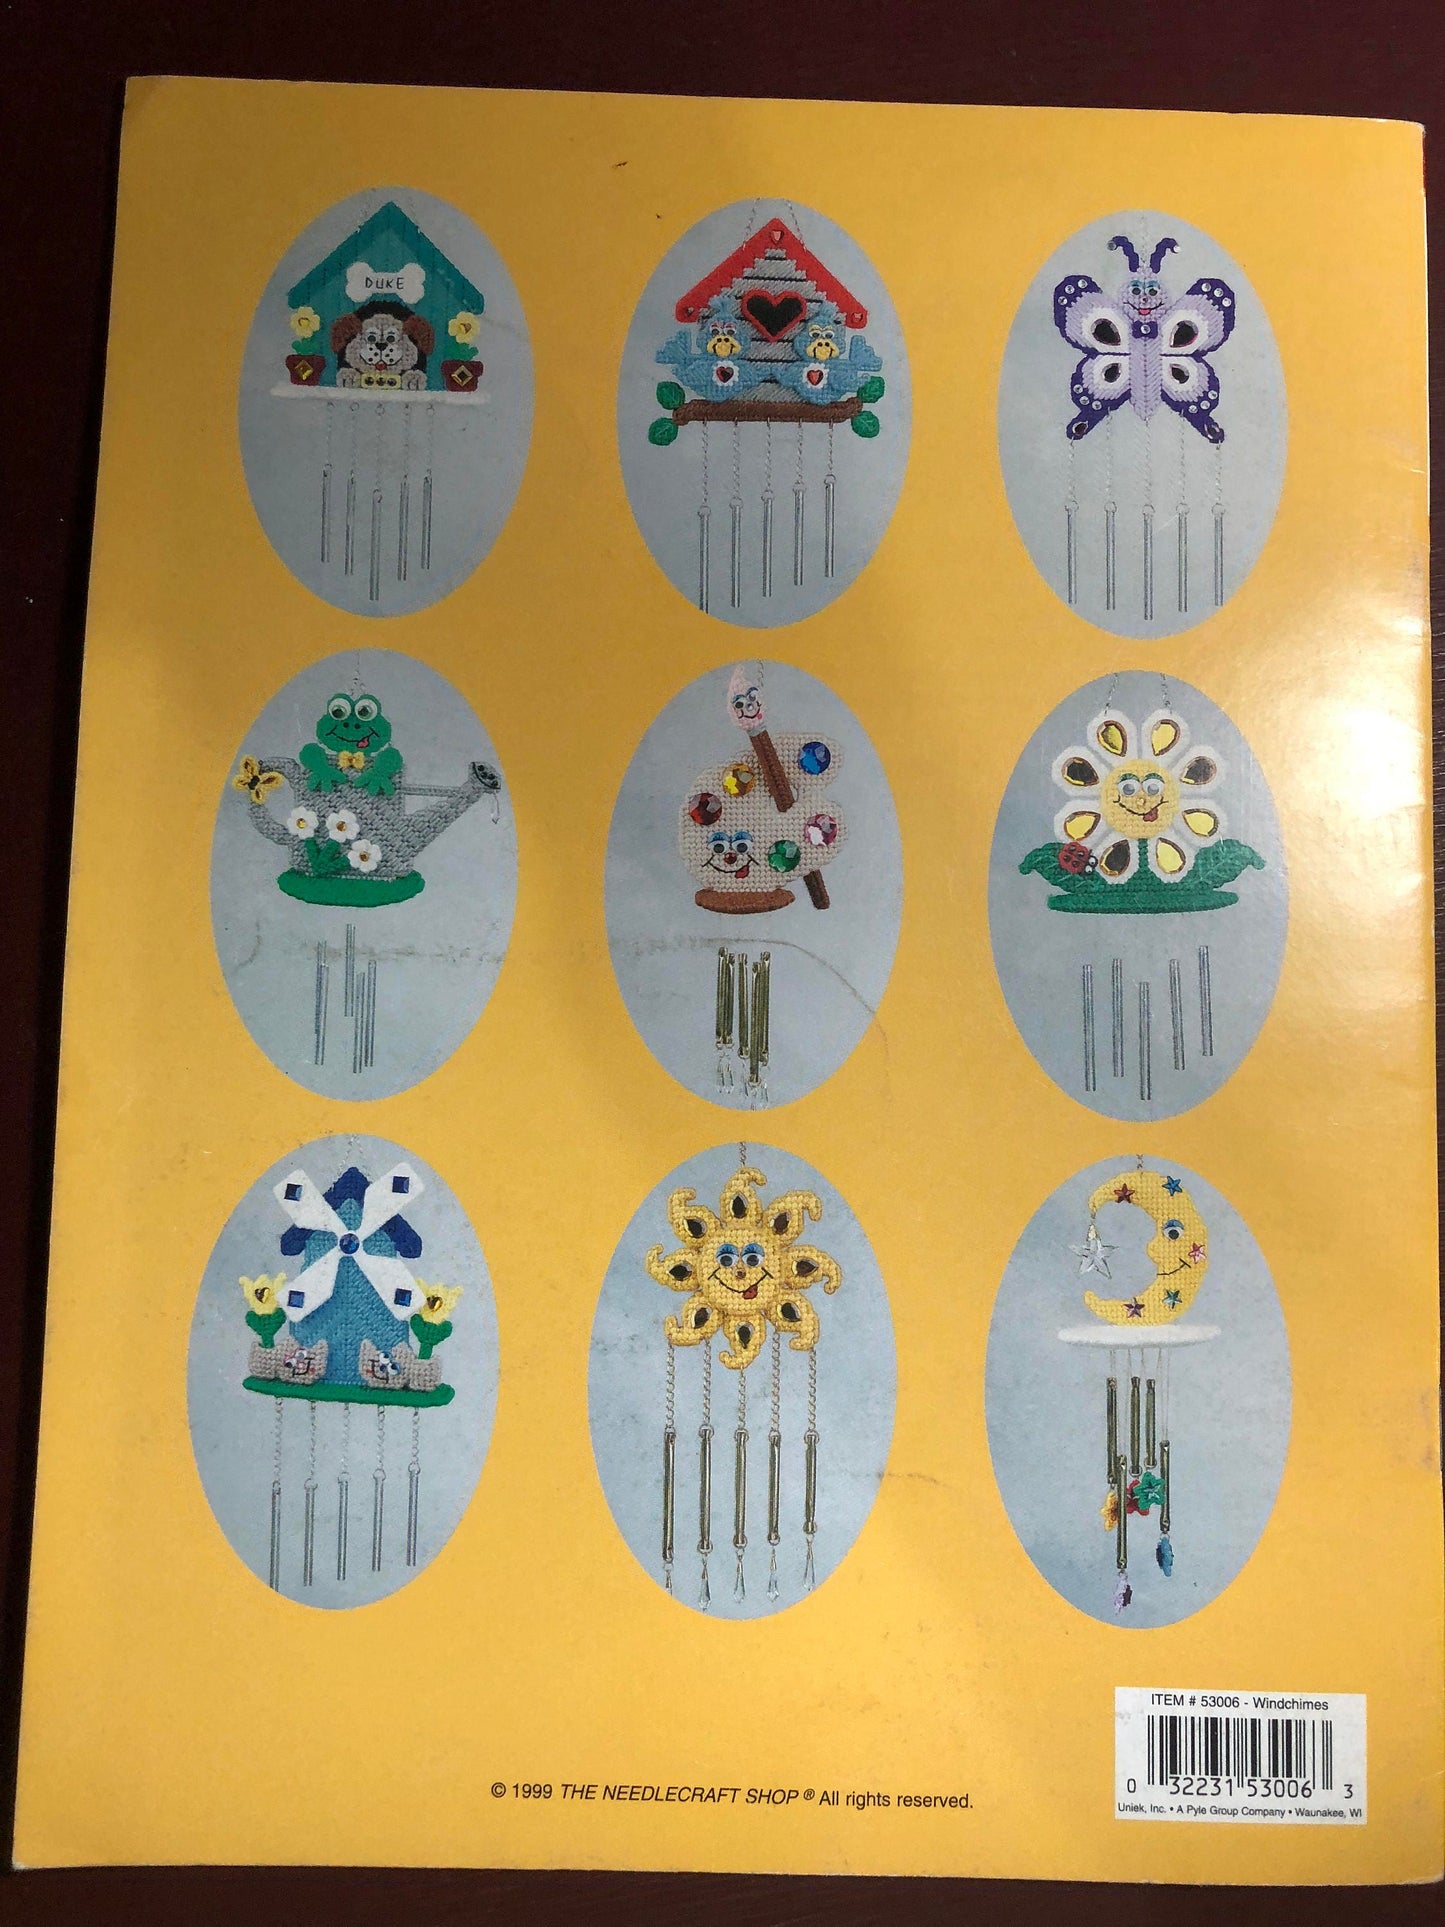 Vintage 1995 Windchimes, 9 New Plastic Canvas projects, Quick Count, designed by Sheri Lautenschlager 53006 patterns